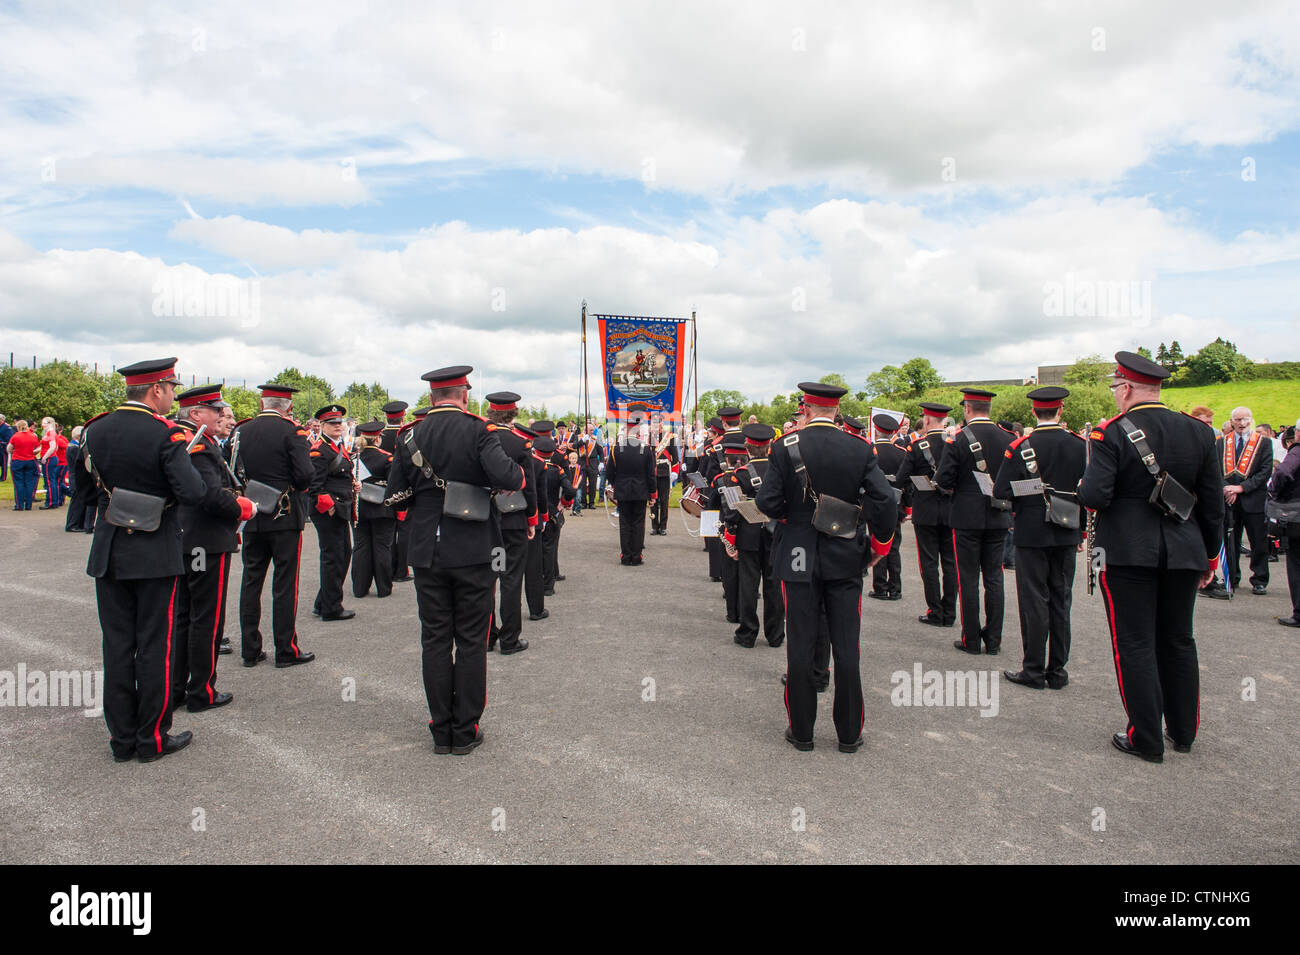 Ballygowan Flute Band arriving at the assembly field at Ballynahinch for the 12th July 2012 parade Stock Photo